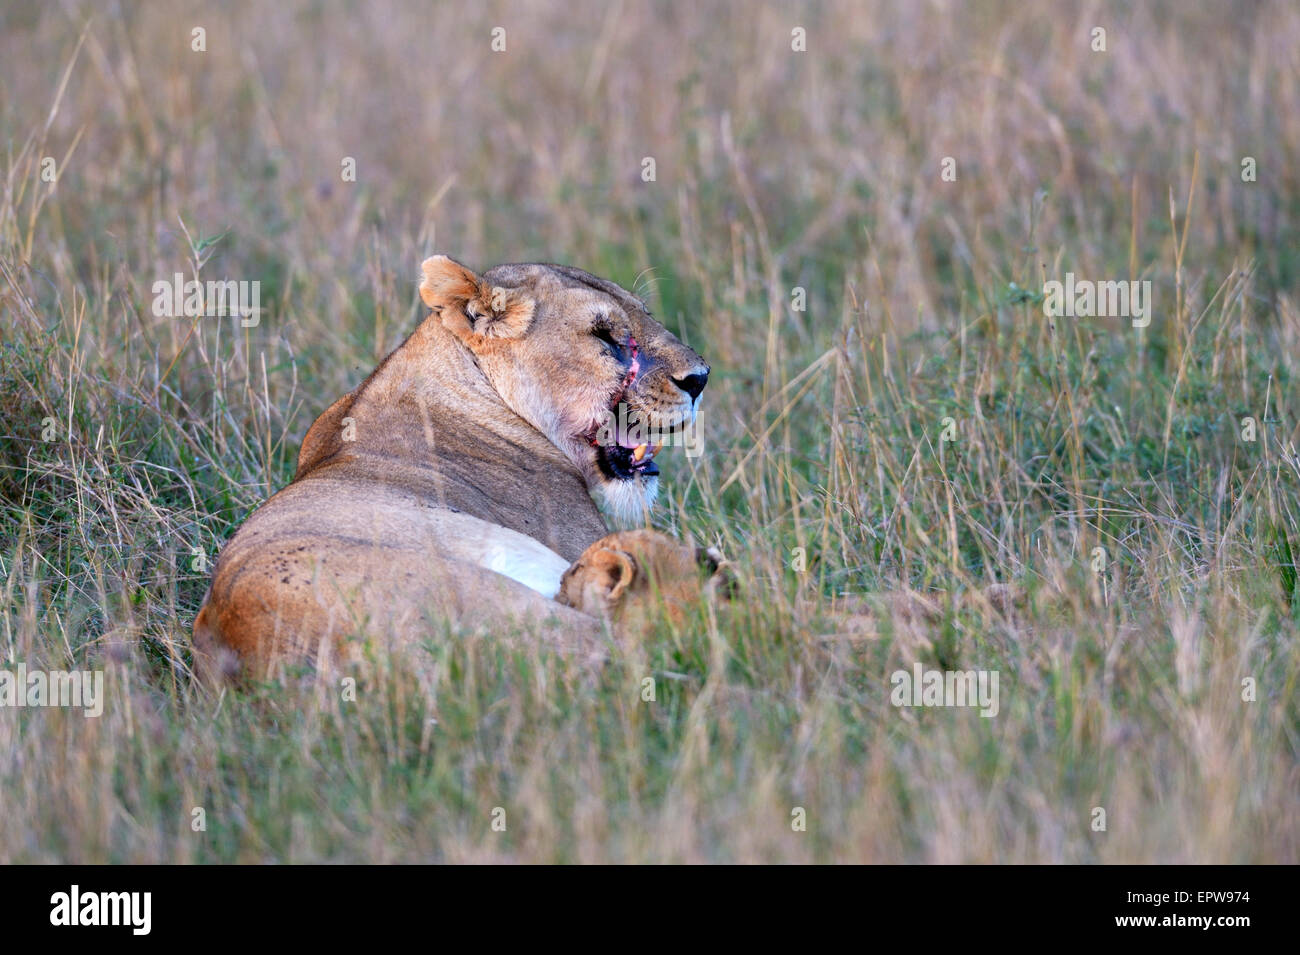 Lioness (Panthera leo) with scarred face suckling her cub, Masai Mara National Reserve, Kenya Stock Photo